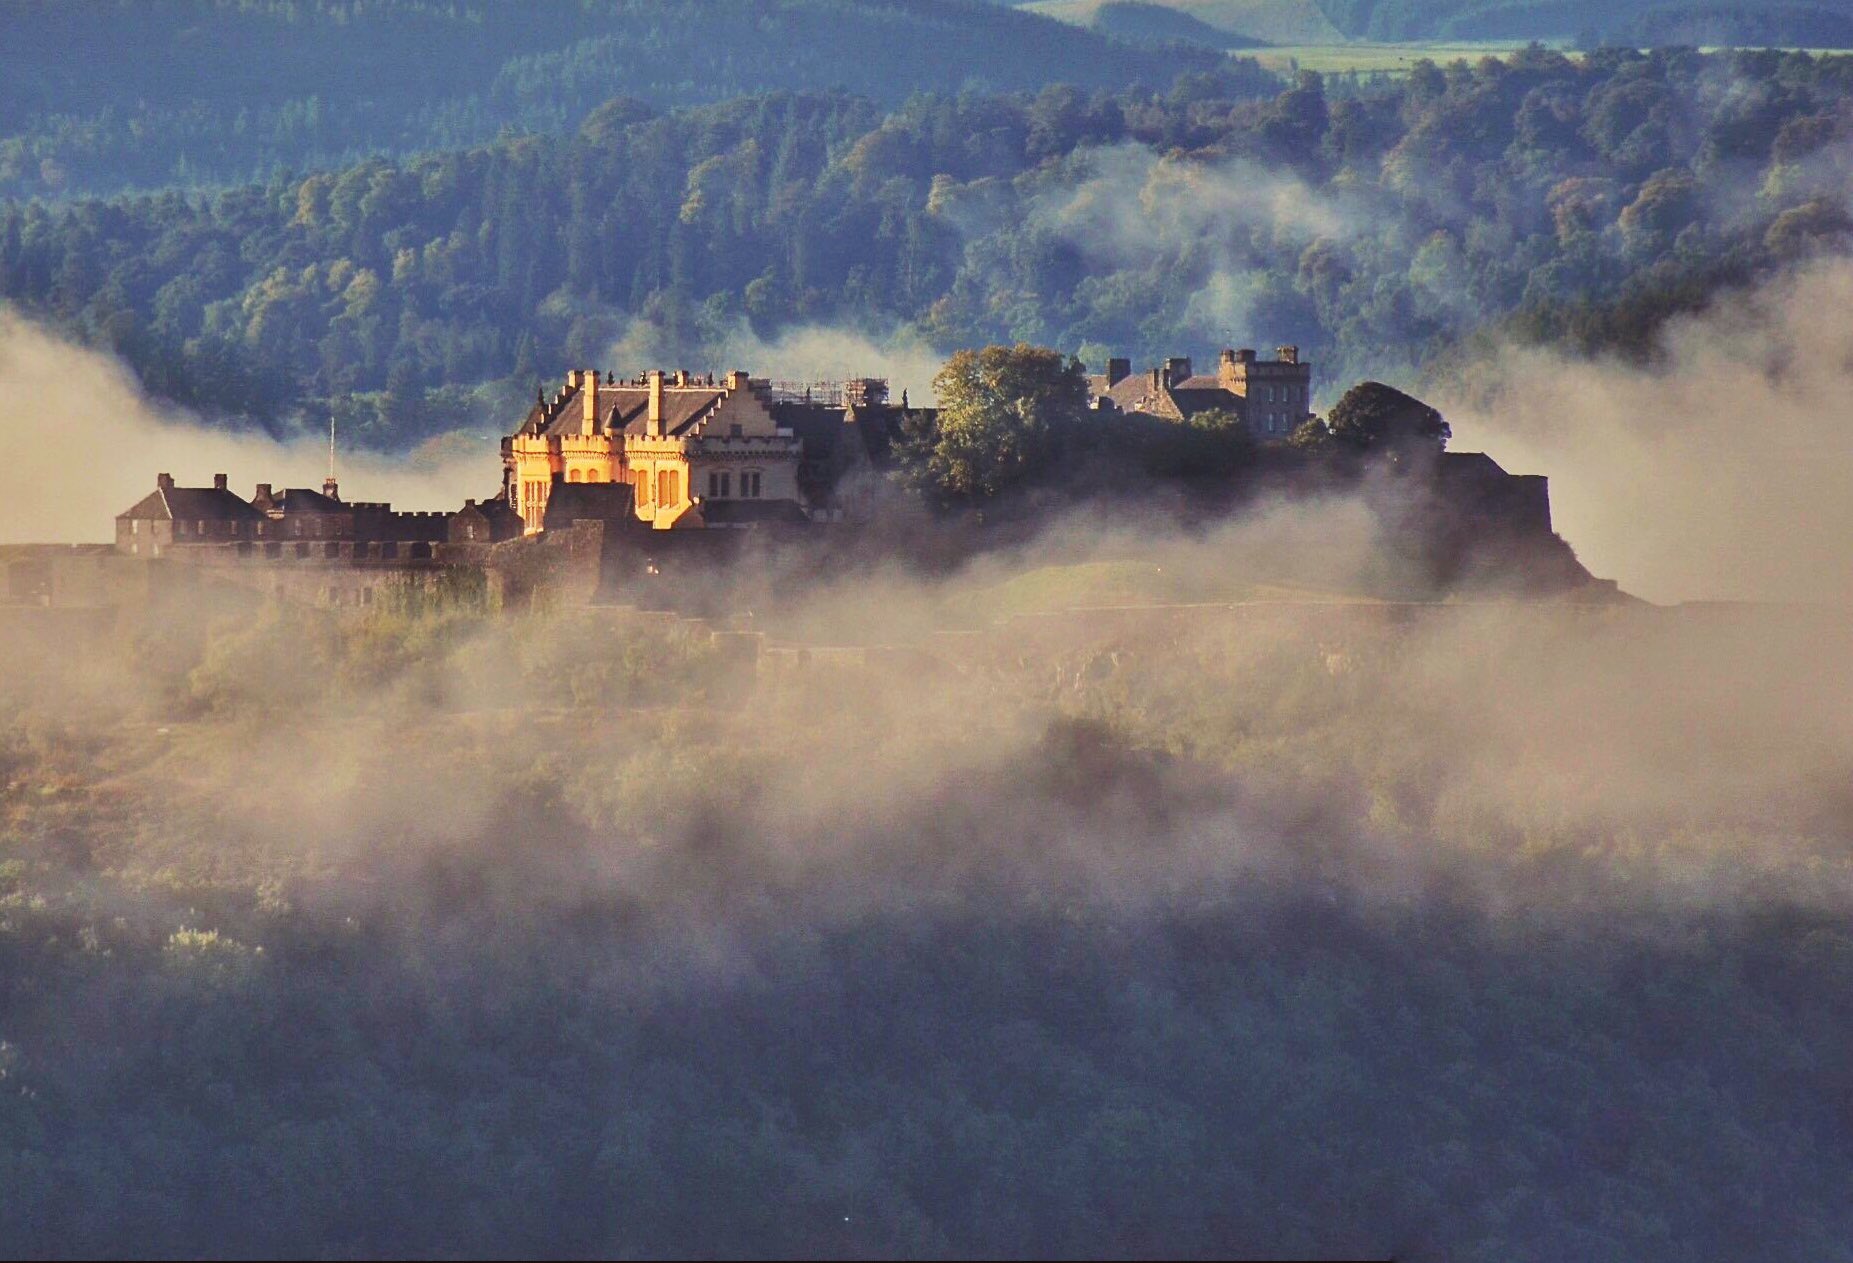 Stirling Castle shrouded in the early morning mist by Charles McGuigan @CharlesMcGuiga2